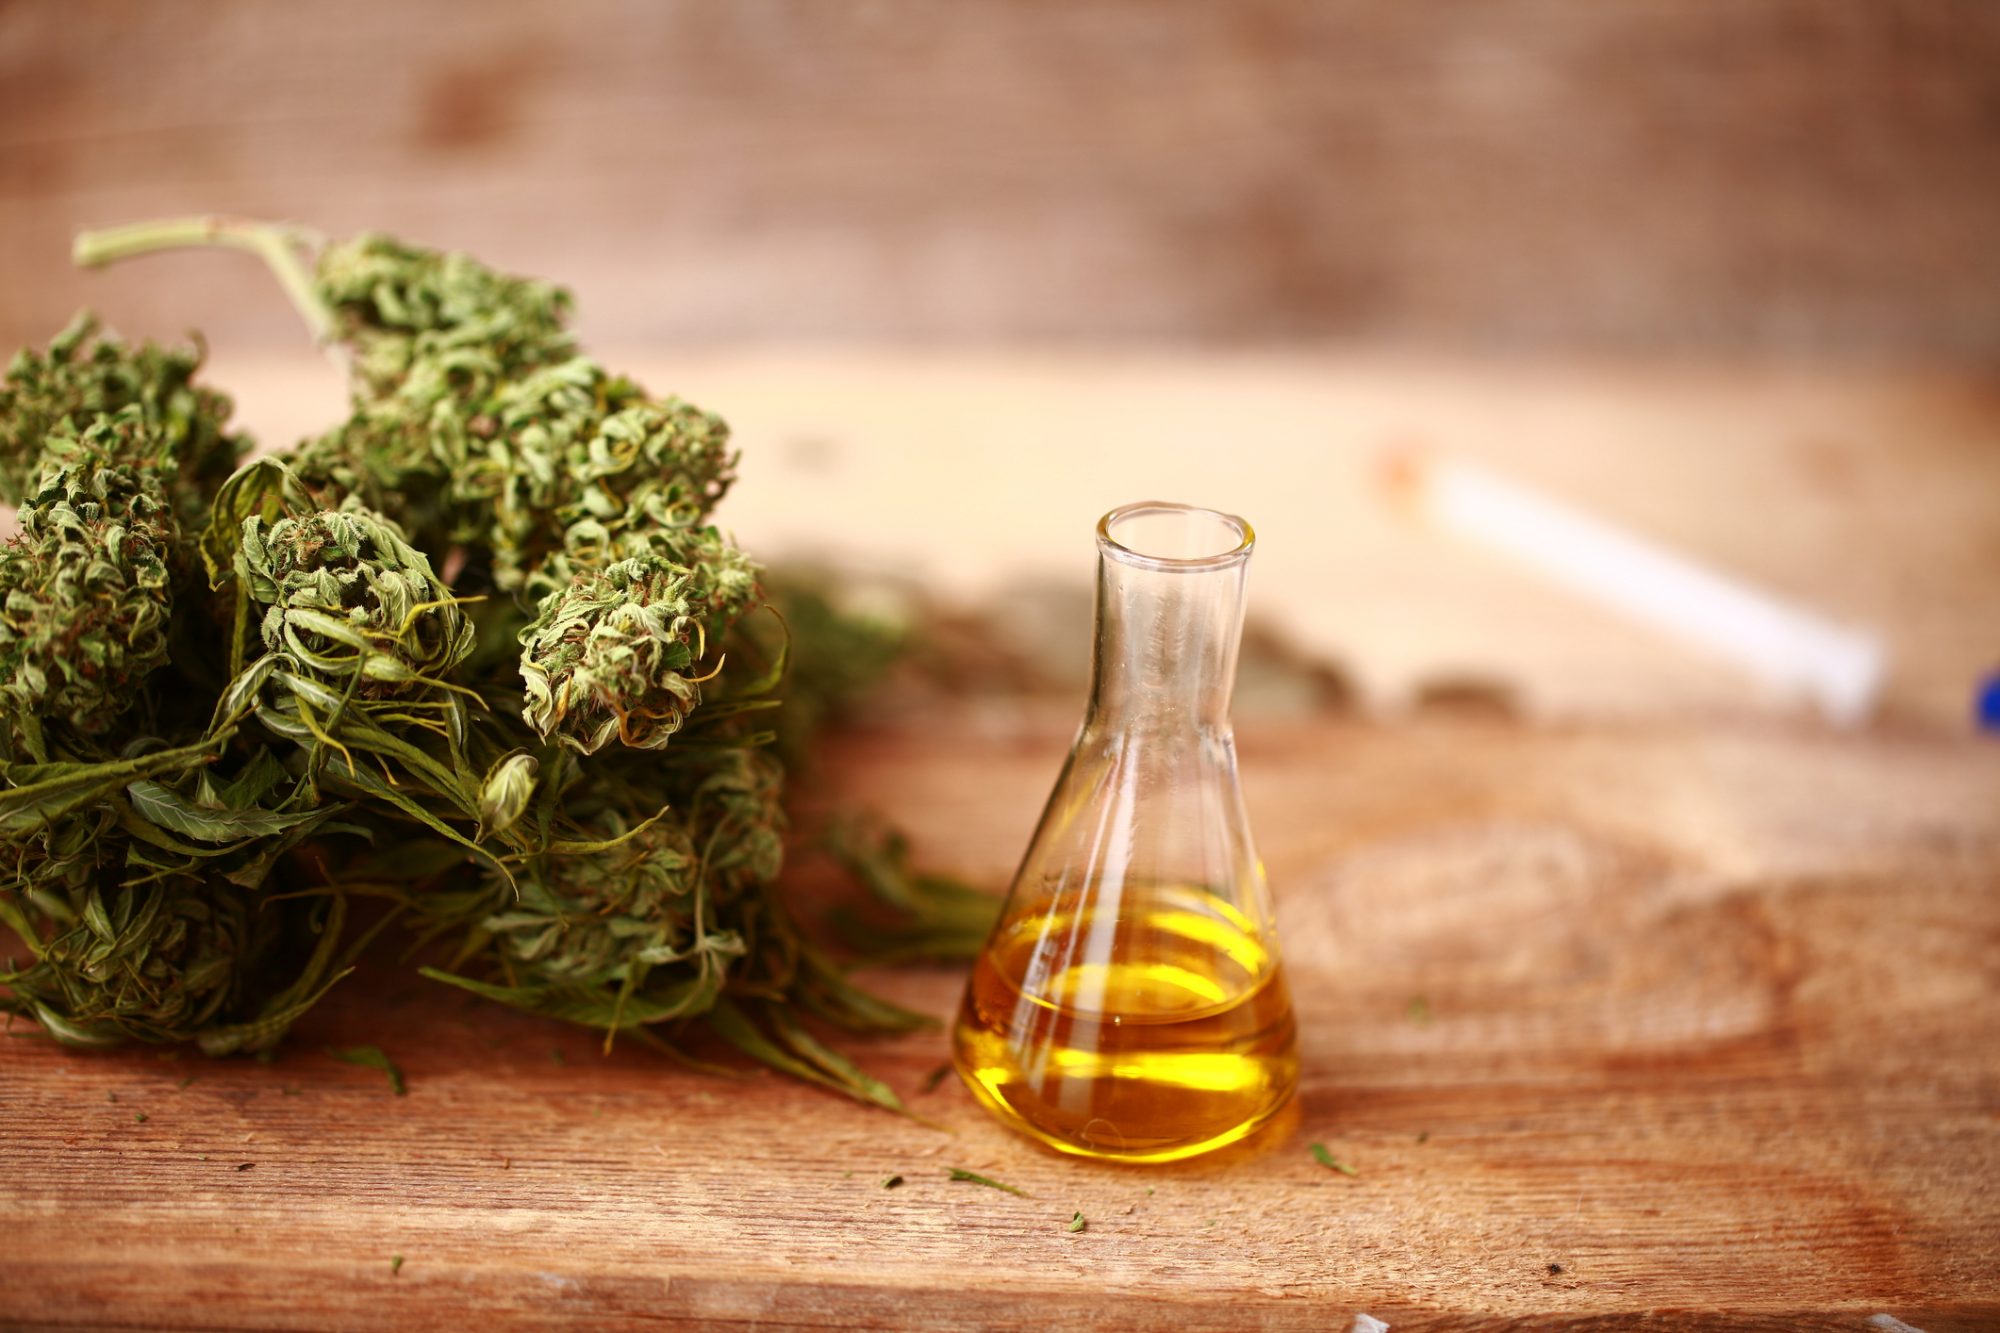 Is CBD oil safe and what are the benefits?